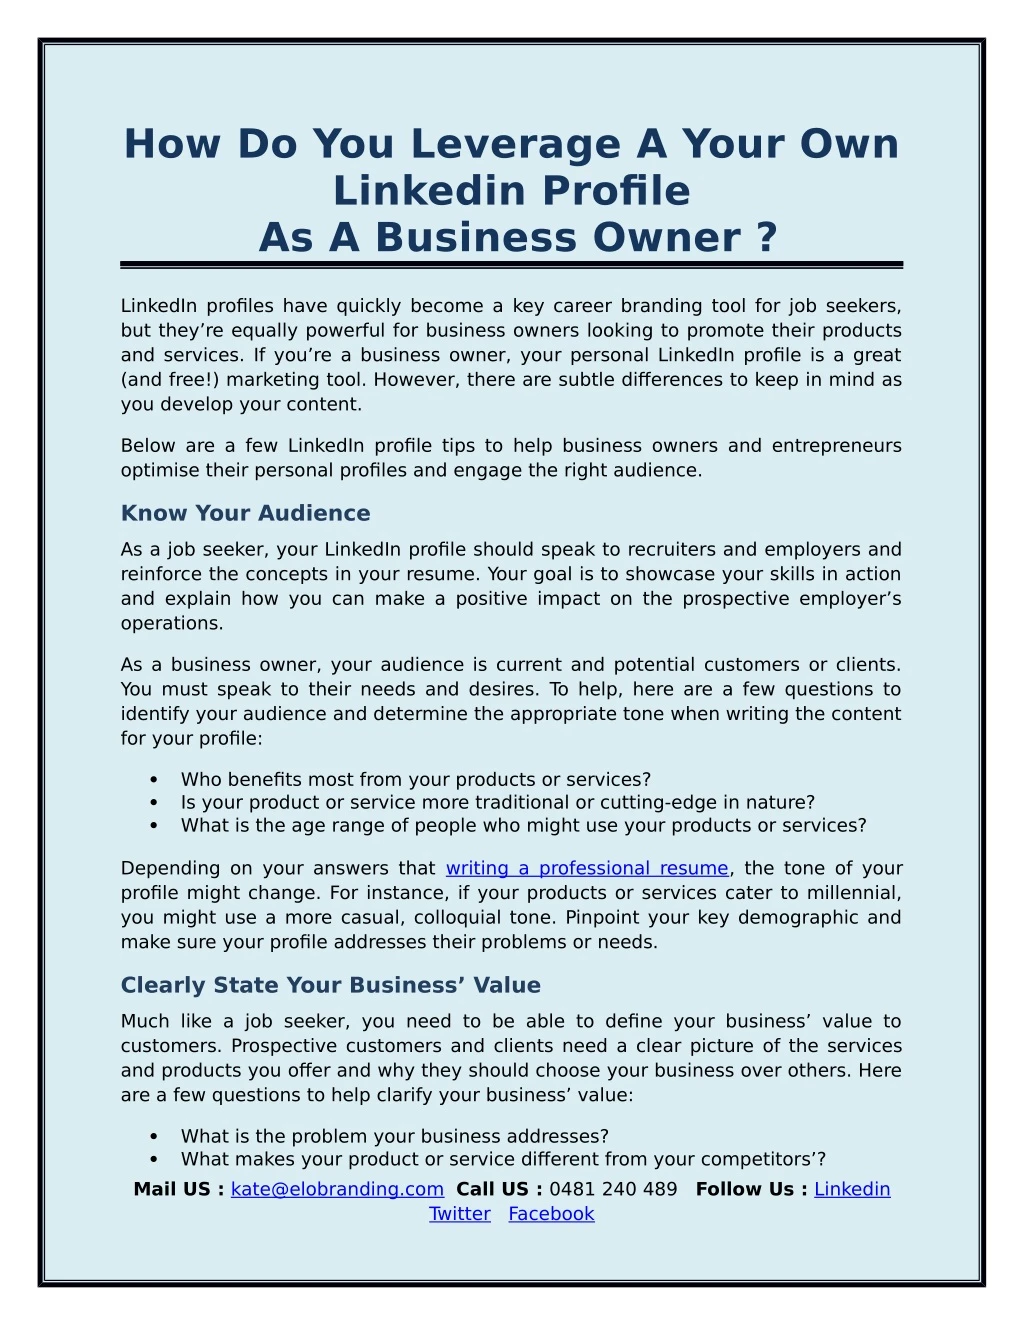 how do you leverage a your own linkedin profile